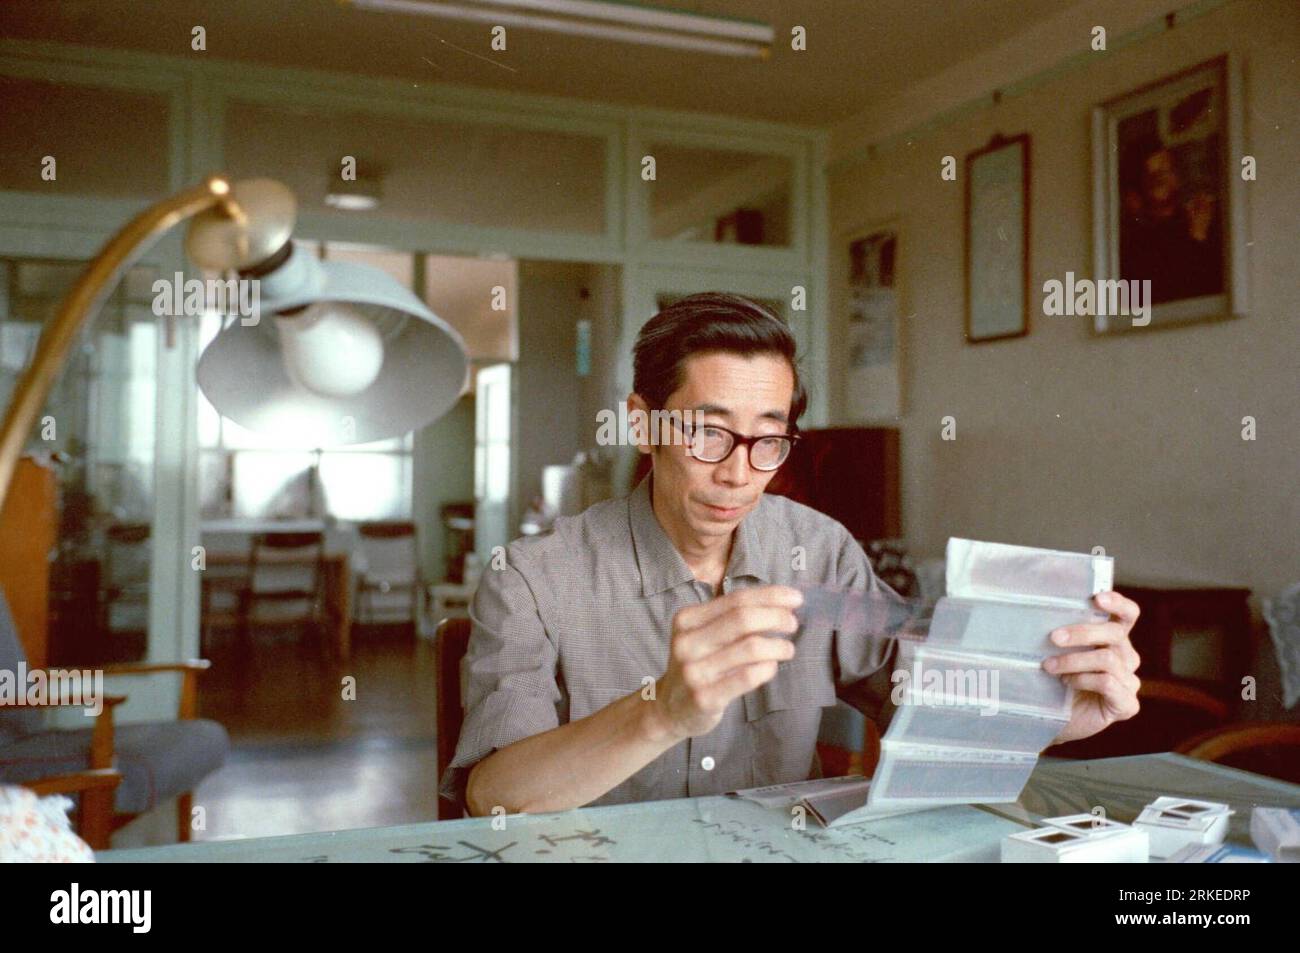 Bildnummer: 55244026  Datum: 06.11.1975  Copyright: imago/Xinhua (110407) -- SHANGHAI, April 7,  (Xinhua) -- Undated file photo shows Zhou Haiying looking at photo films at his home. Zhou Haiying, the son of the famous 20th century Chinese writer Lu Xun, died of illness Thursday morning at the age of 81 in Beijing. China s State Administration of Radio, Film and Television (SARFT), the government agency which Zhou once worked for, issued an obituary on its website. (Xinhua) (hdt) FILE-CHINA-ZHOU HAIYING-DEATH (CN) PUBLICATIONxNOTxINxCHN People Kultur Literatur kbdig xsk 1975 quer; Aufnahmedatu Stock Photo